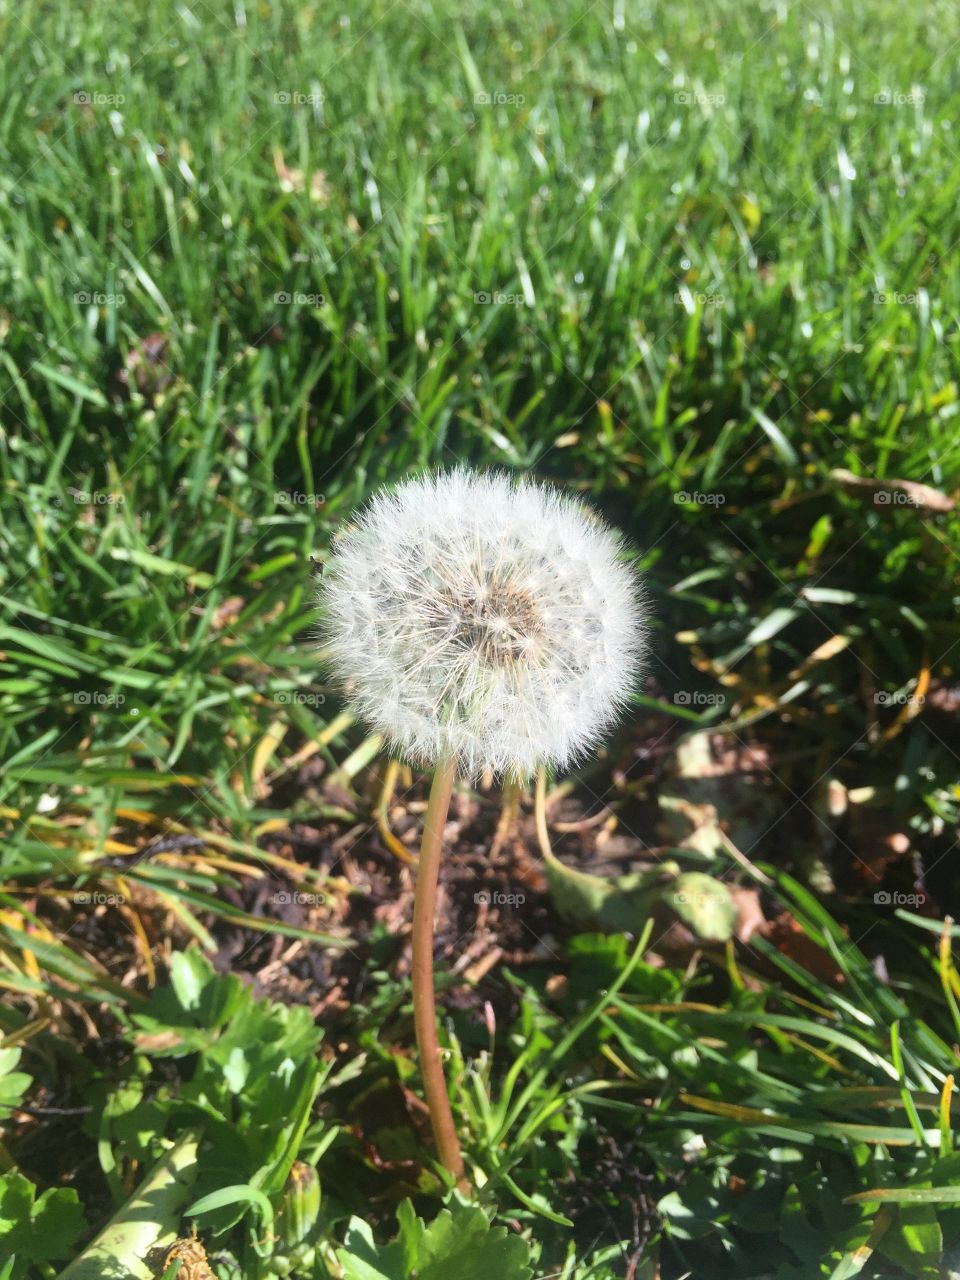 a dandelion on the grass